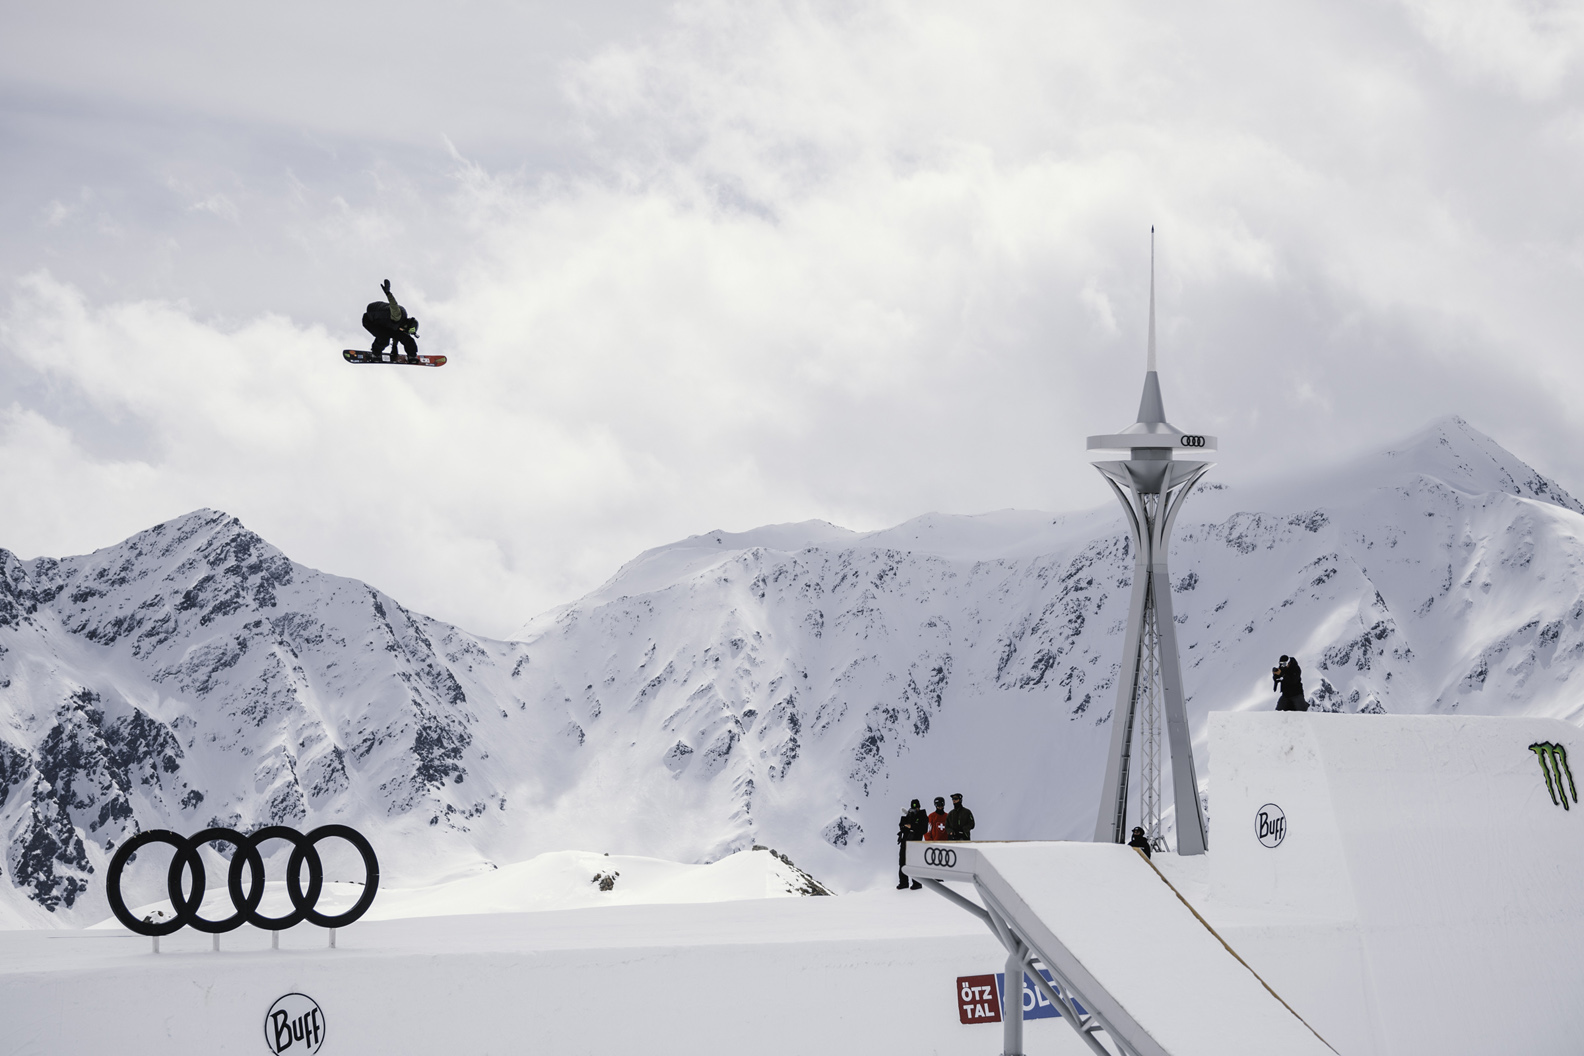 Monster Energy's Sven Thorgren Takes 2nd Place in Freestyle Snowboard Contest at Audi Nines in Sölden, Austria